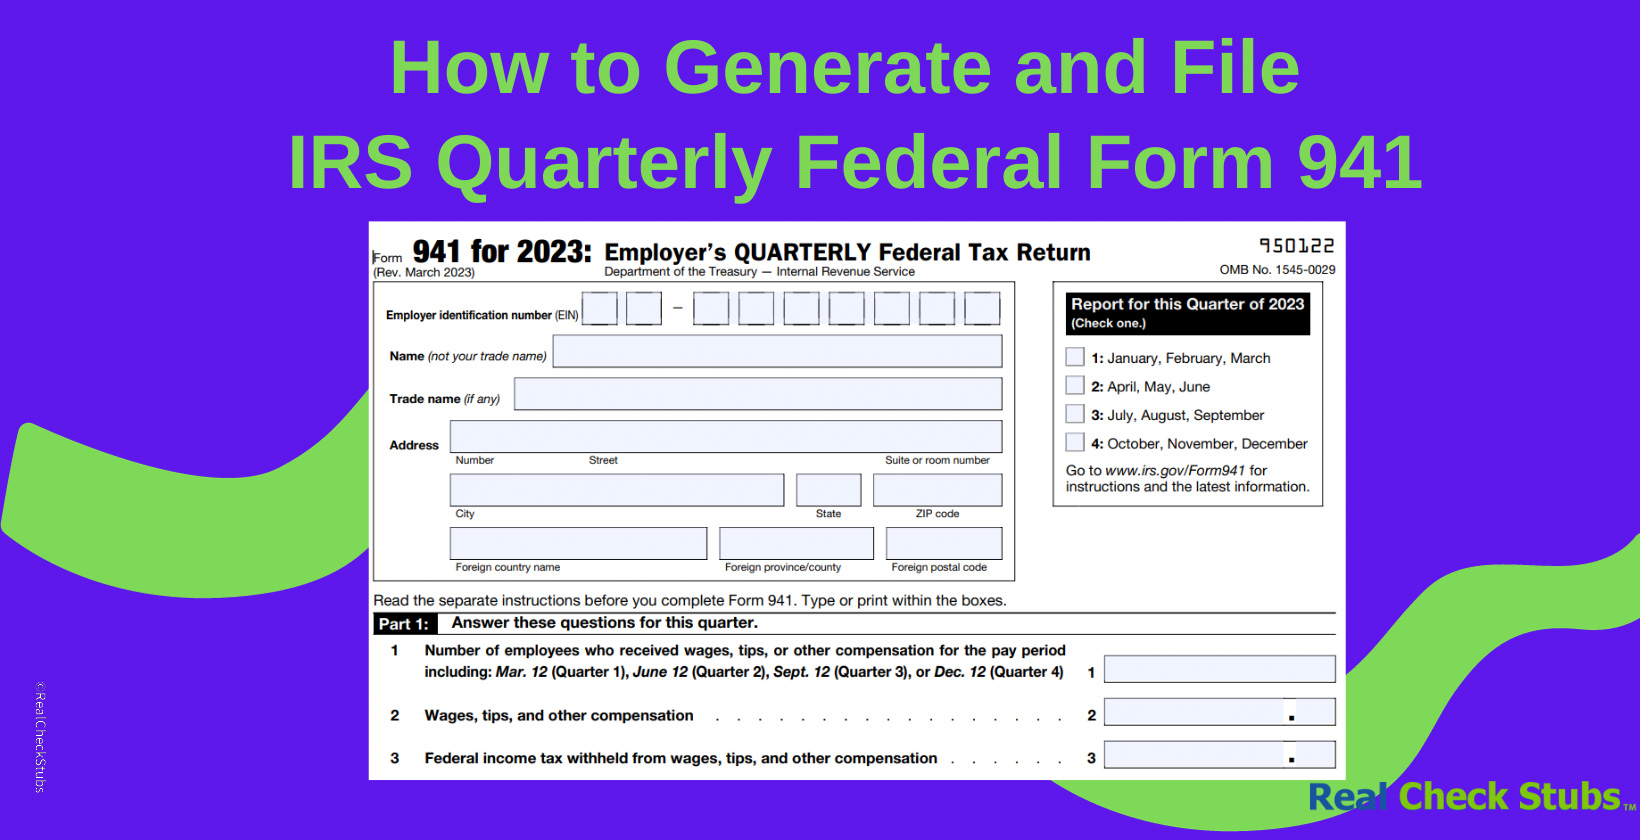 Generate and file IRS quarterly Federal Form 941